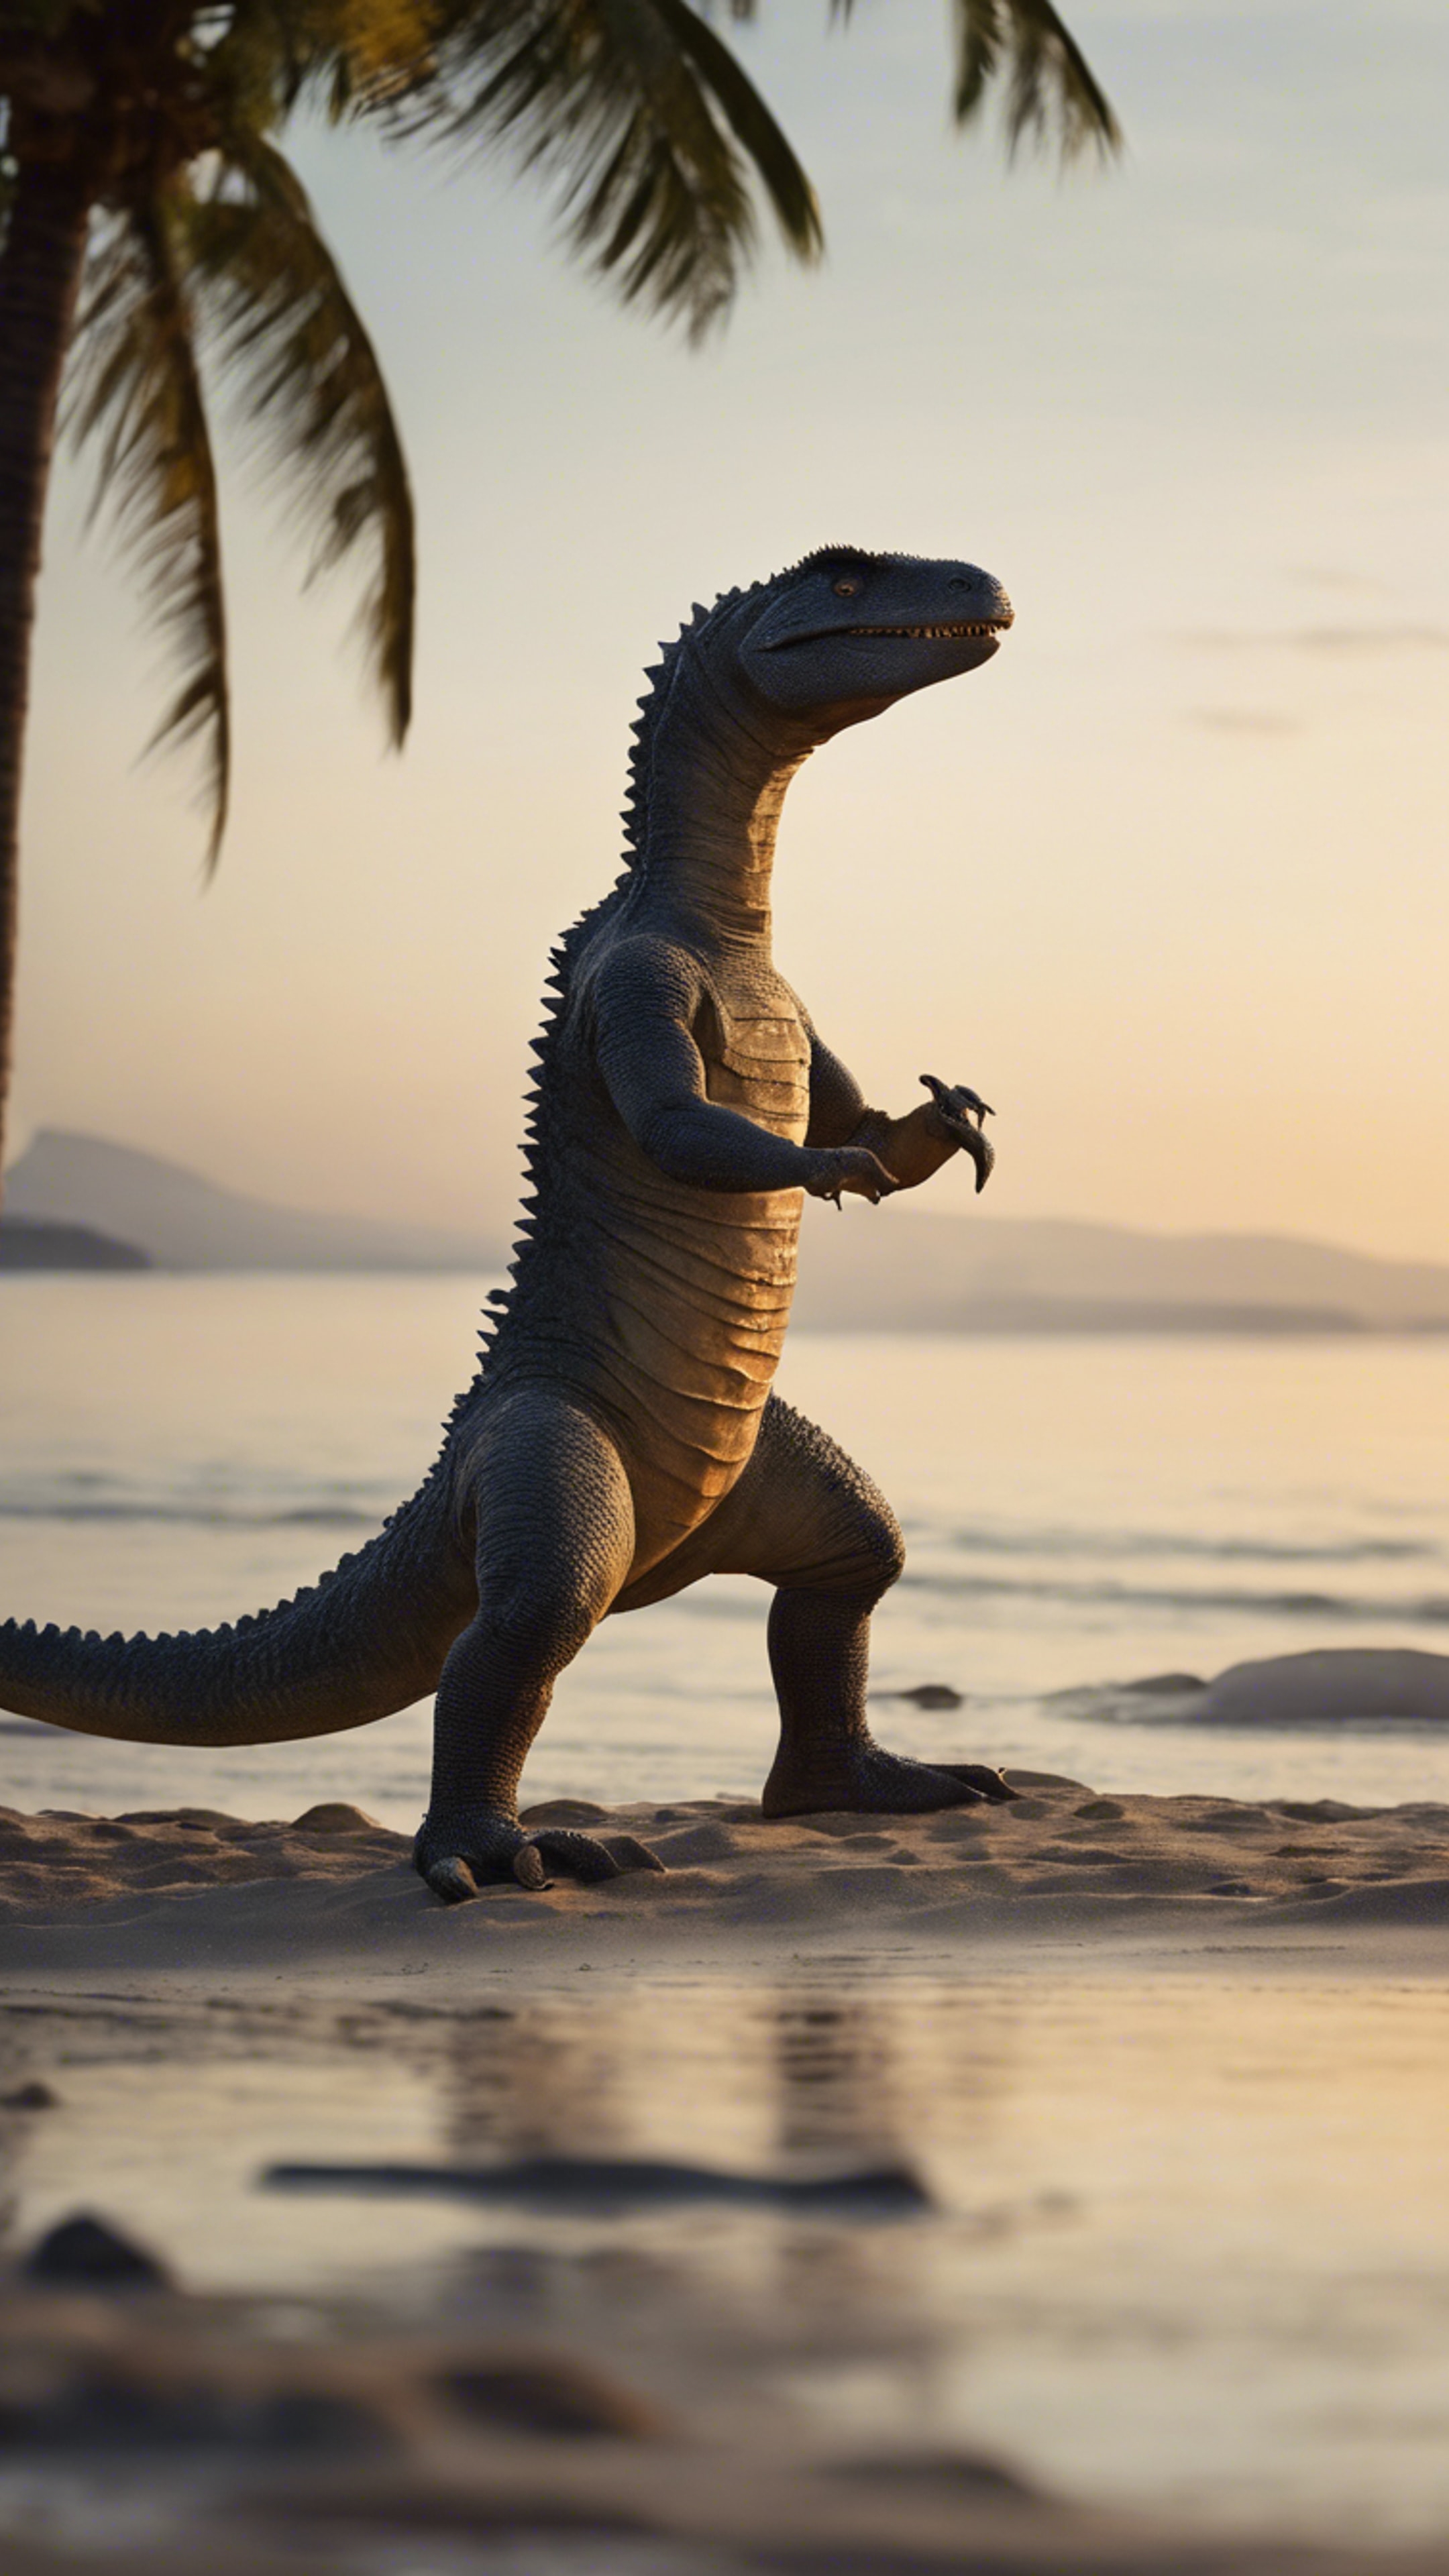 A tranquil scene of Thescelosaurus practicing Tai-Chi during the early dawn on a peaceful beach. Tapetai[4138bc2c7b604ba6814f]